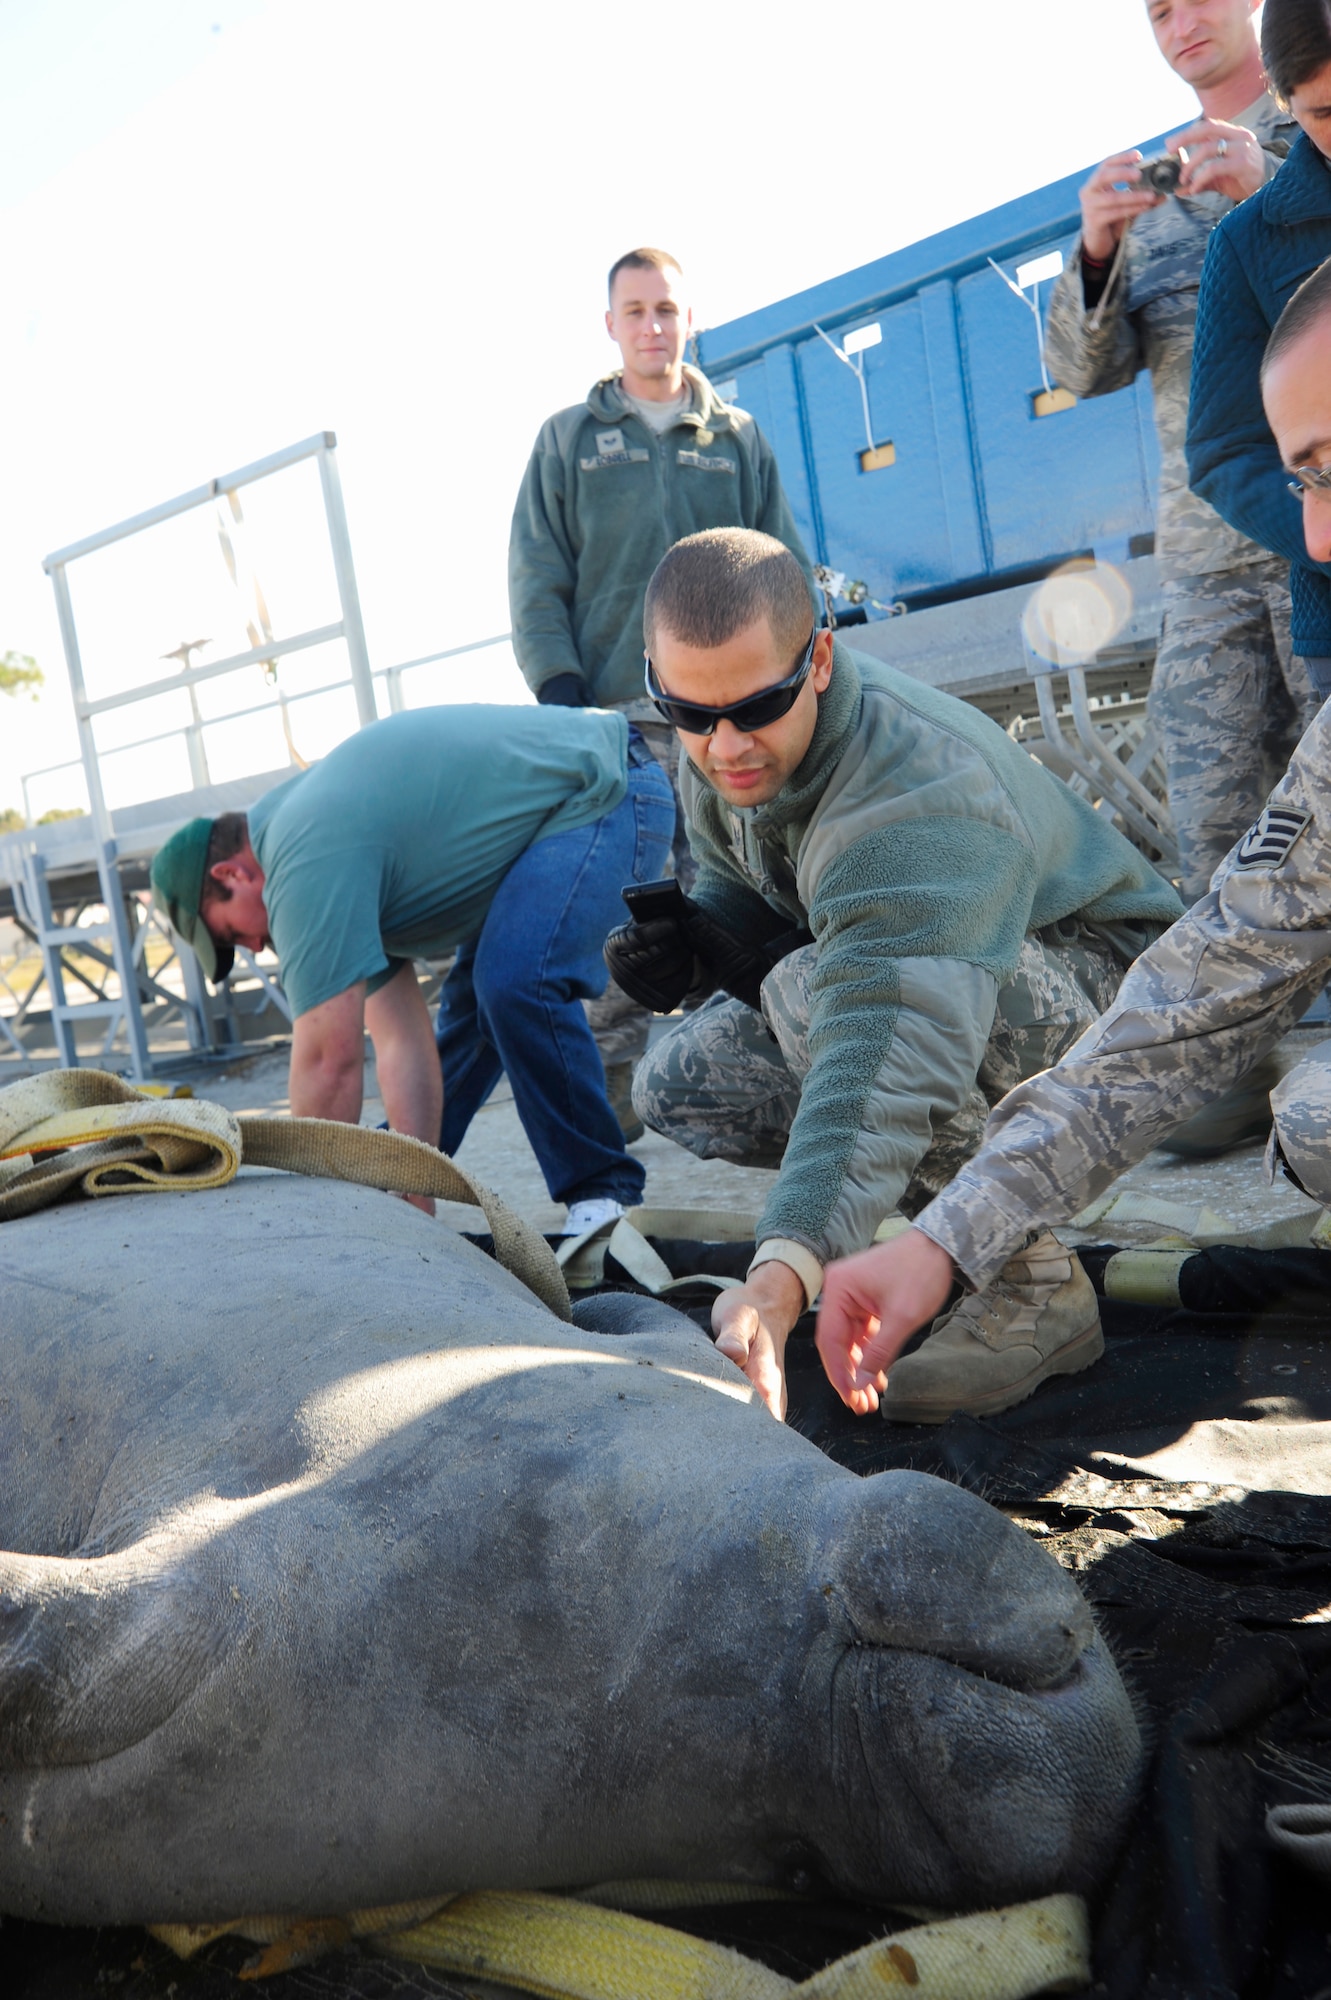 Members of the 6th Logistics Readiness Squadron at MacDill Air Force Base, Fla., assist in the transport of an 840-pound male manatee Dec. 9, 2010. Accompanied by six biologists and two veterinarians, the sea cow is heading to San Juan, Puerto Rico, after suffering minor injuries in a boat strike. Officials from Air Mobility Command and the Puerto Ric0 Air National Guard’s 156th Airlift Wing are working together to airlift the mammal to San Juan. (U.S. Air Force photo/Staff Sgt. Angela Ruiz)